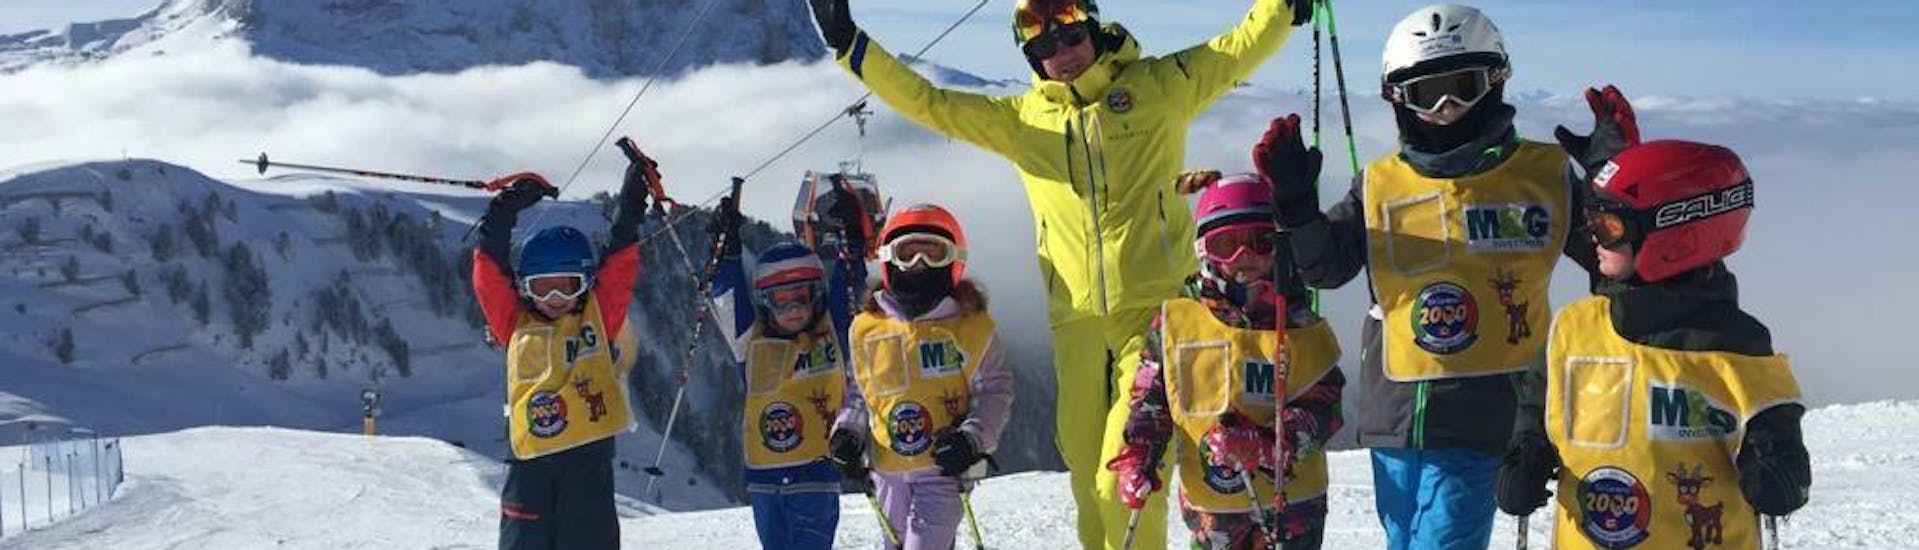 Ski instructor and kids in Selva di Val Gardena (Wolkenstein) during one of the Private Ski Lessons for Kids of All Levels.